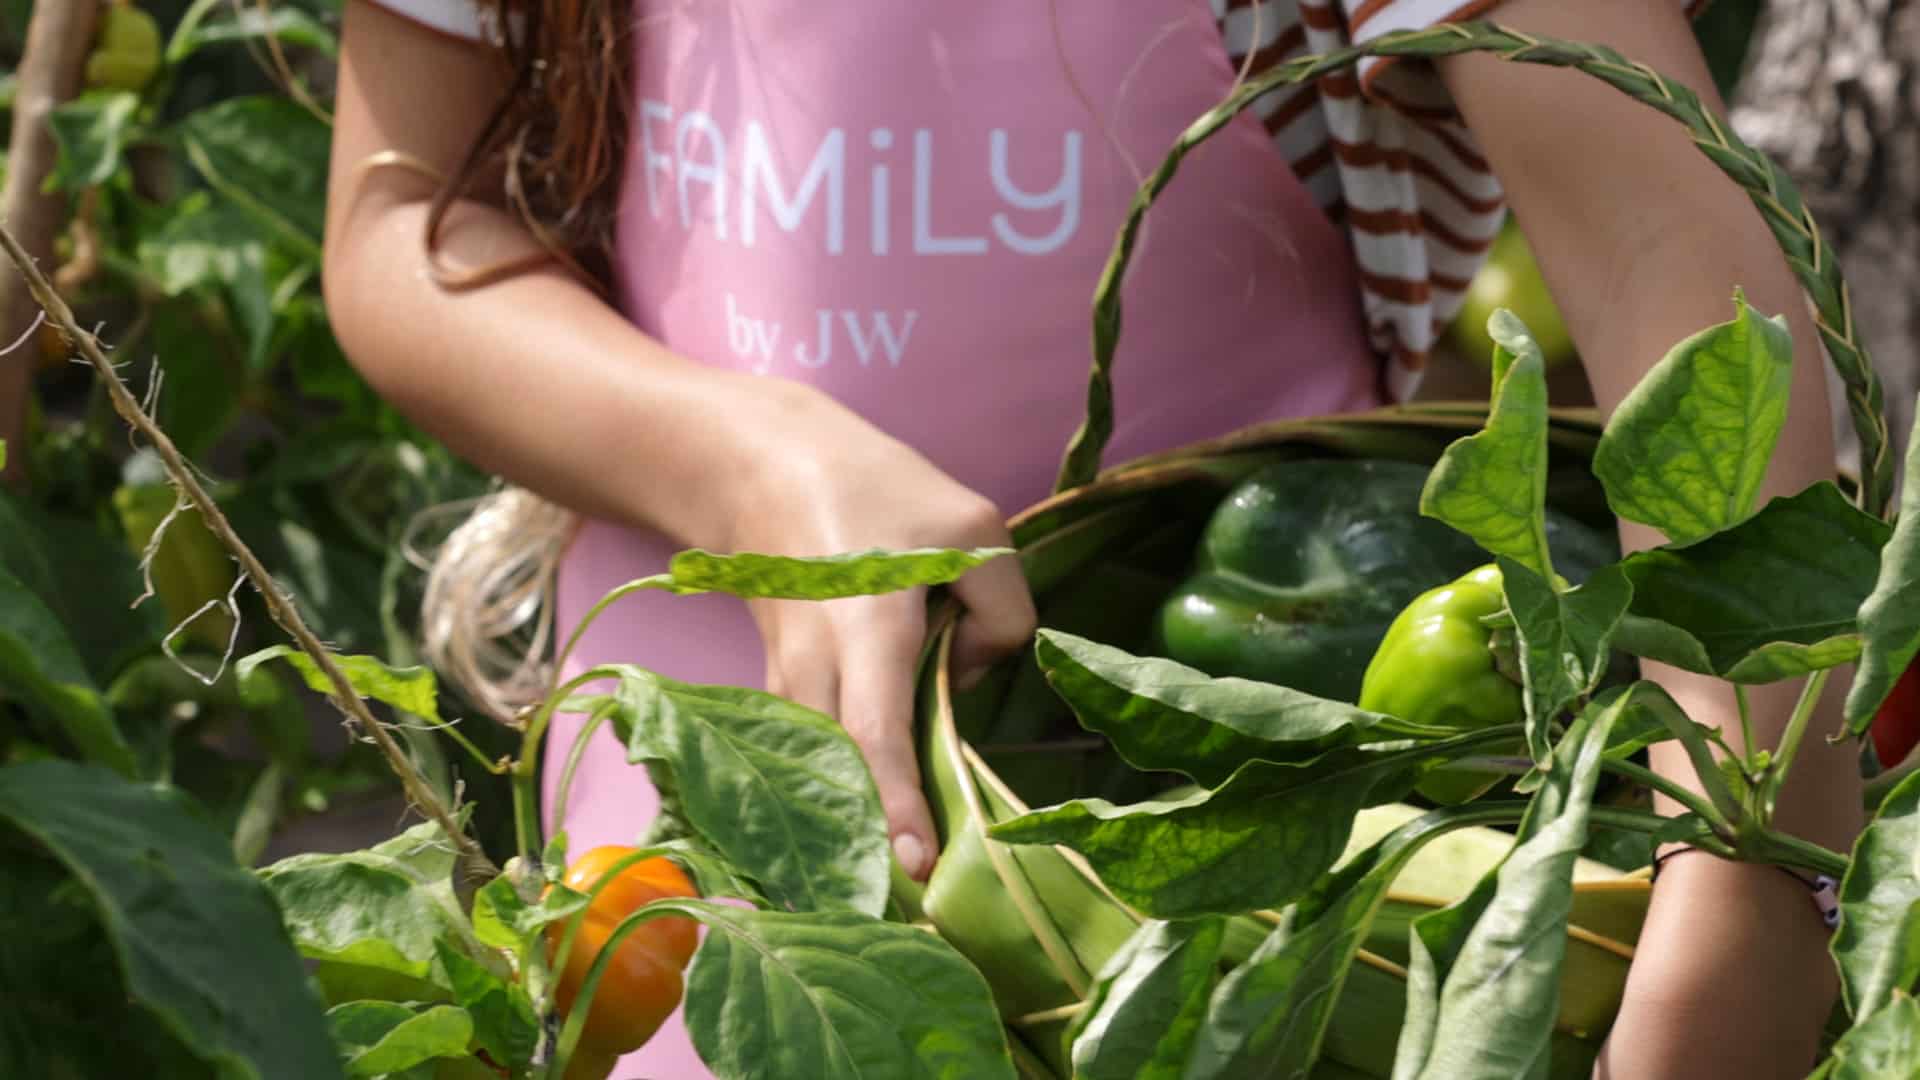 A close-up of a child picking vegetables as part of the Chefs in the Making program at JW Marriott Maldives Resort & Spa